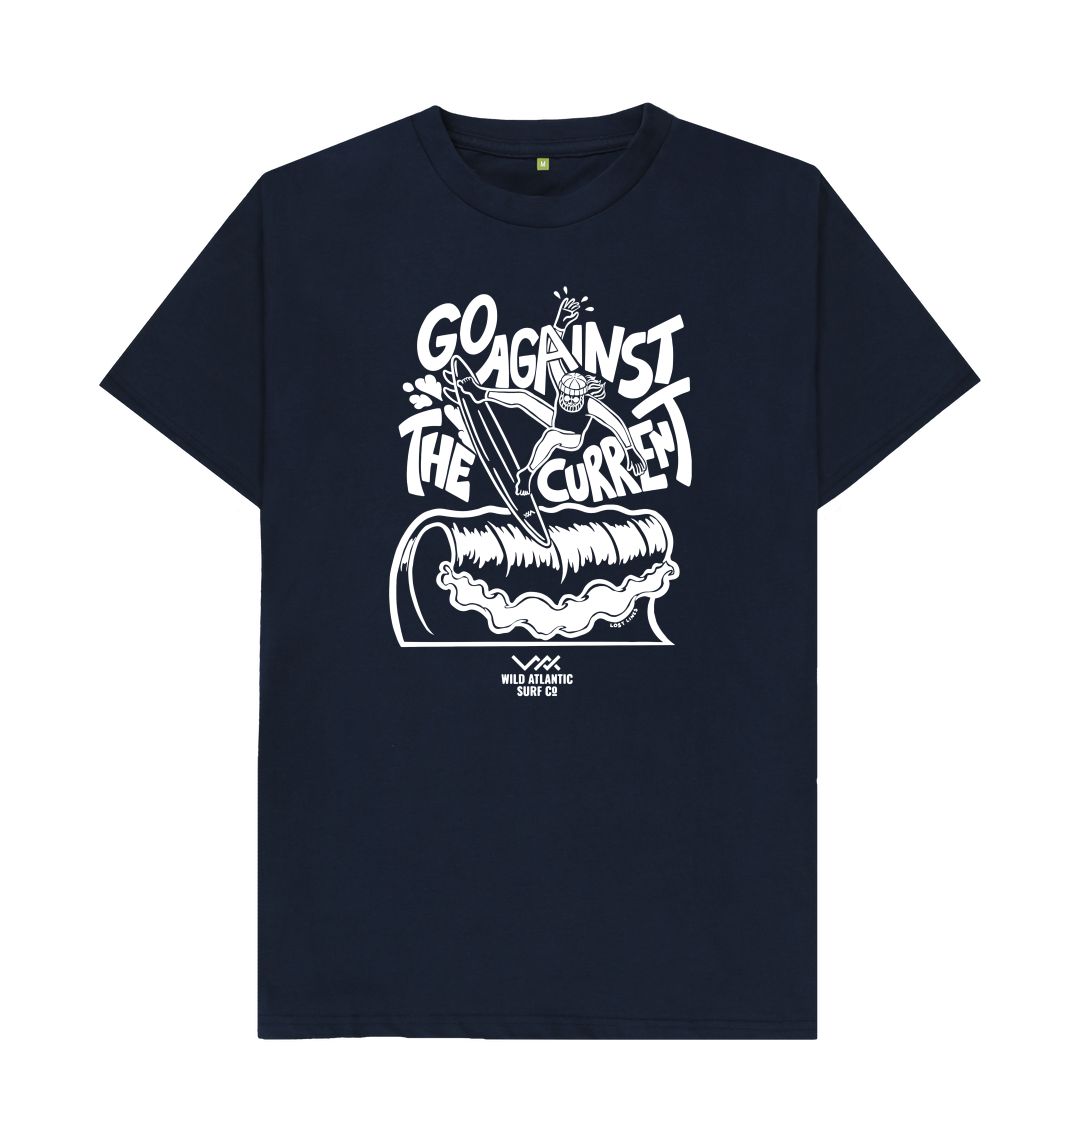 Navy Blue Go Against The Current - B&W Tee